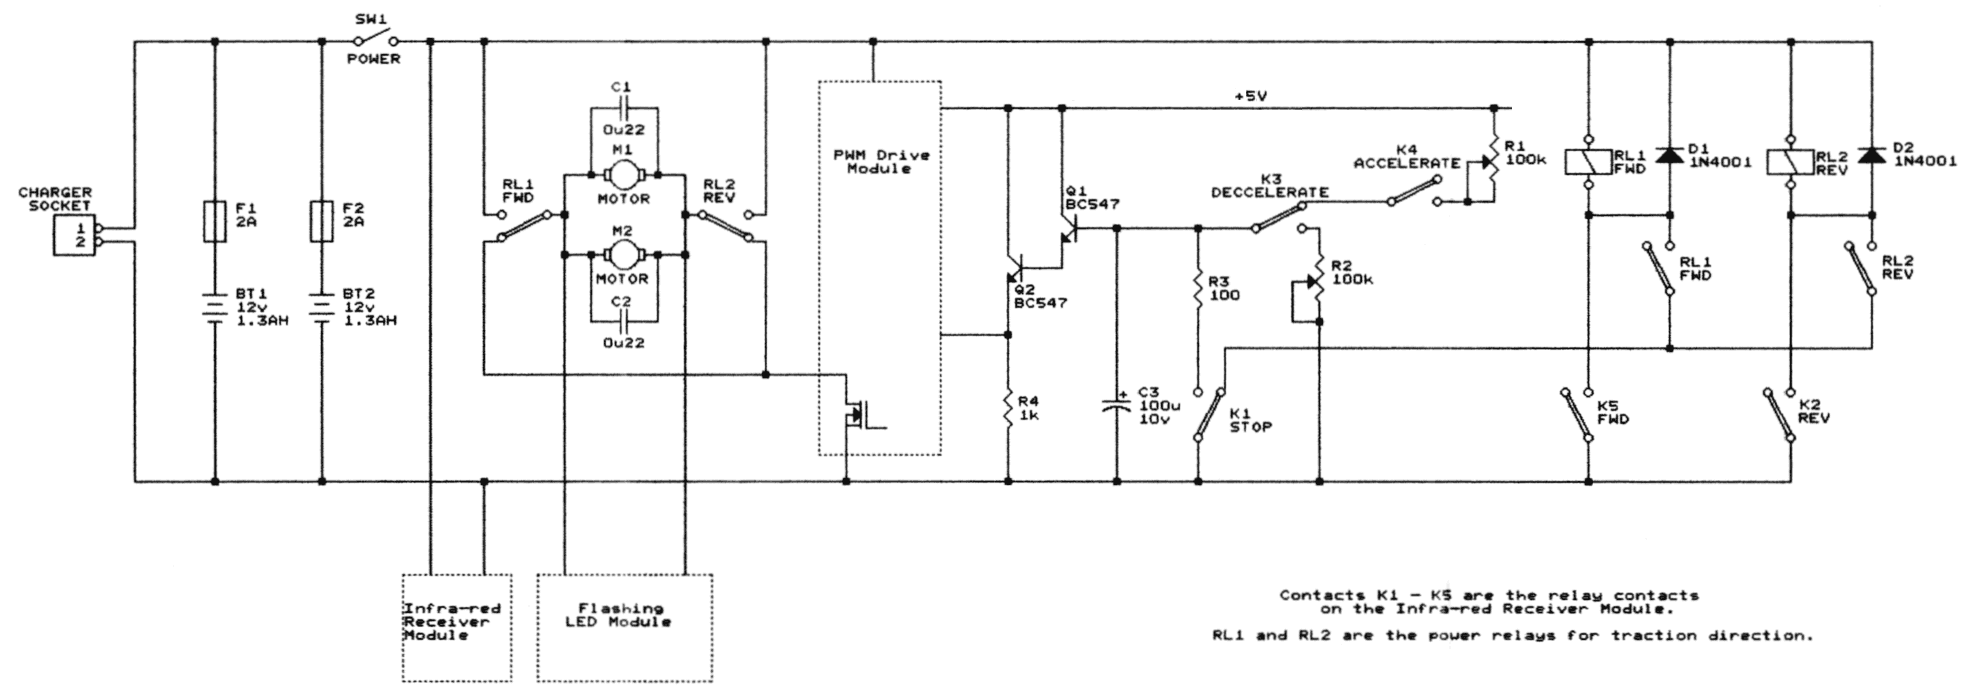 Figure 1: The main circuit diagram (Click to enlarge)